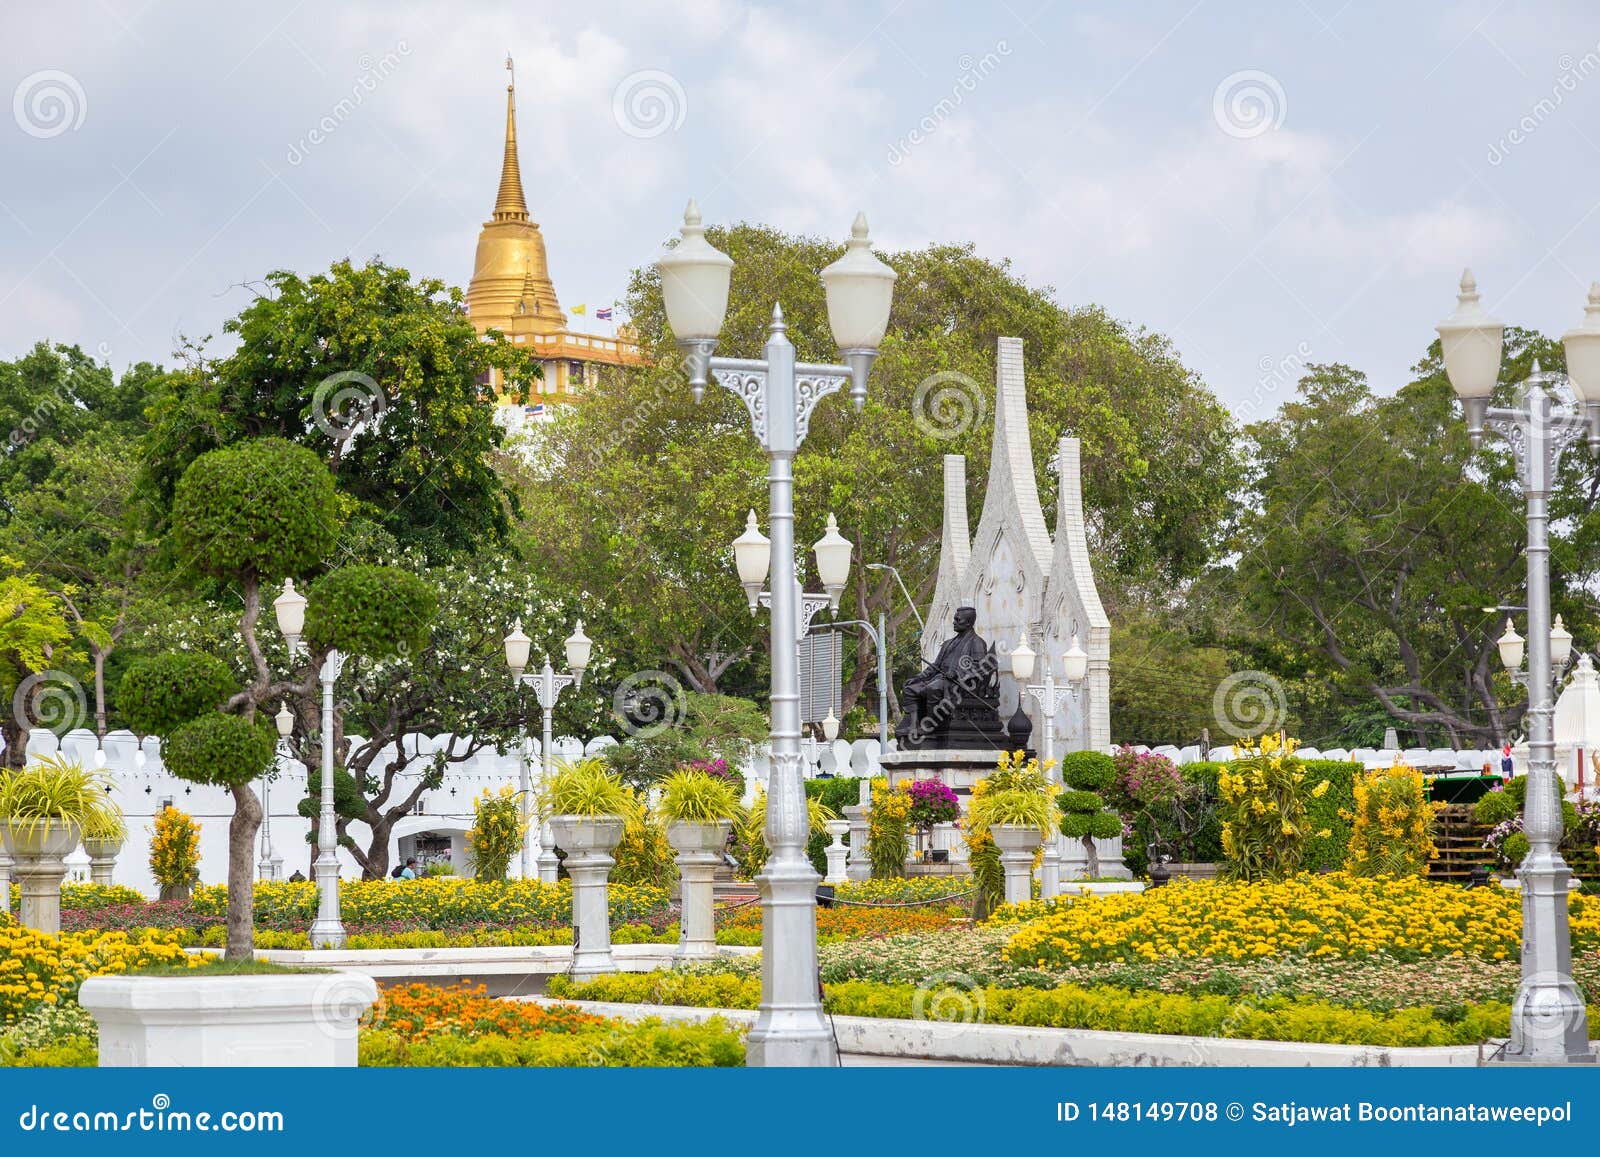 Pathum Thani Thailand May 5 19 The Ice Rink Of The Zpell Or Future Park Rangsit Is The Largest Shopping Mall In Pathum Thani Editorial Stock Photo Image Of Event Future